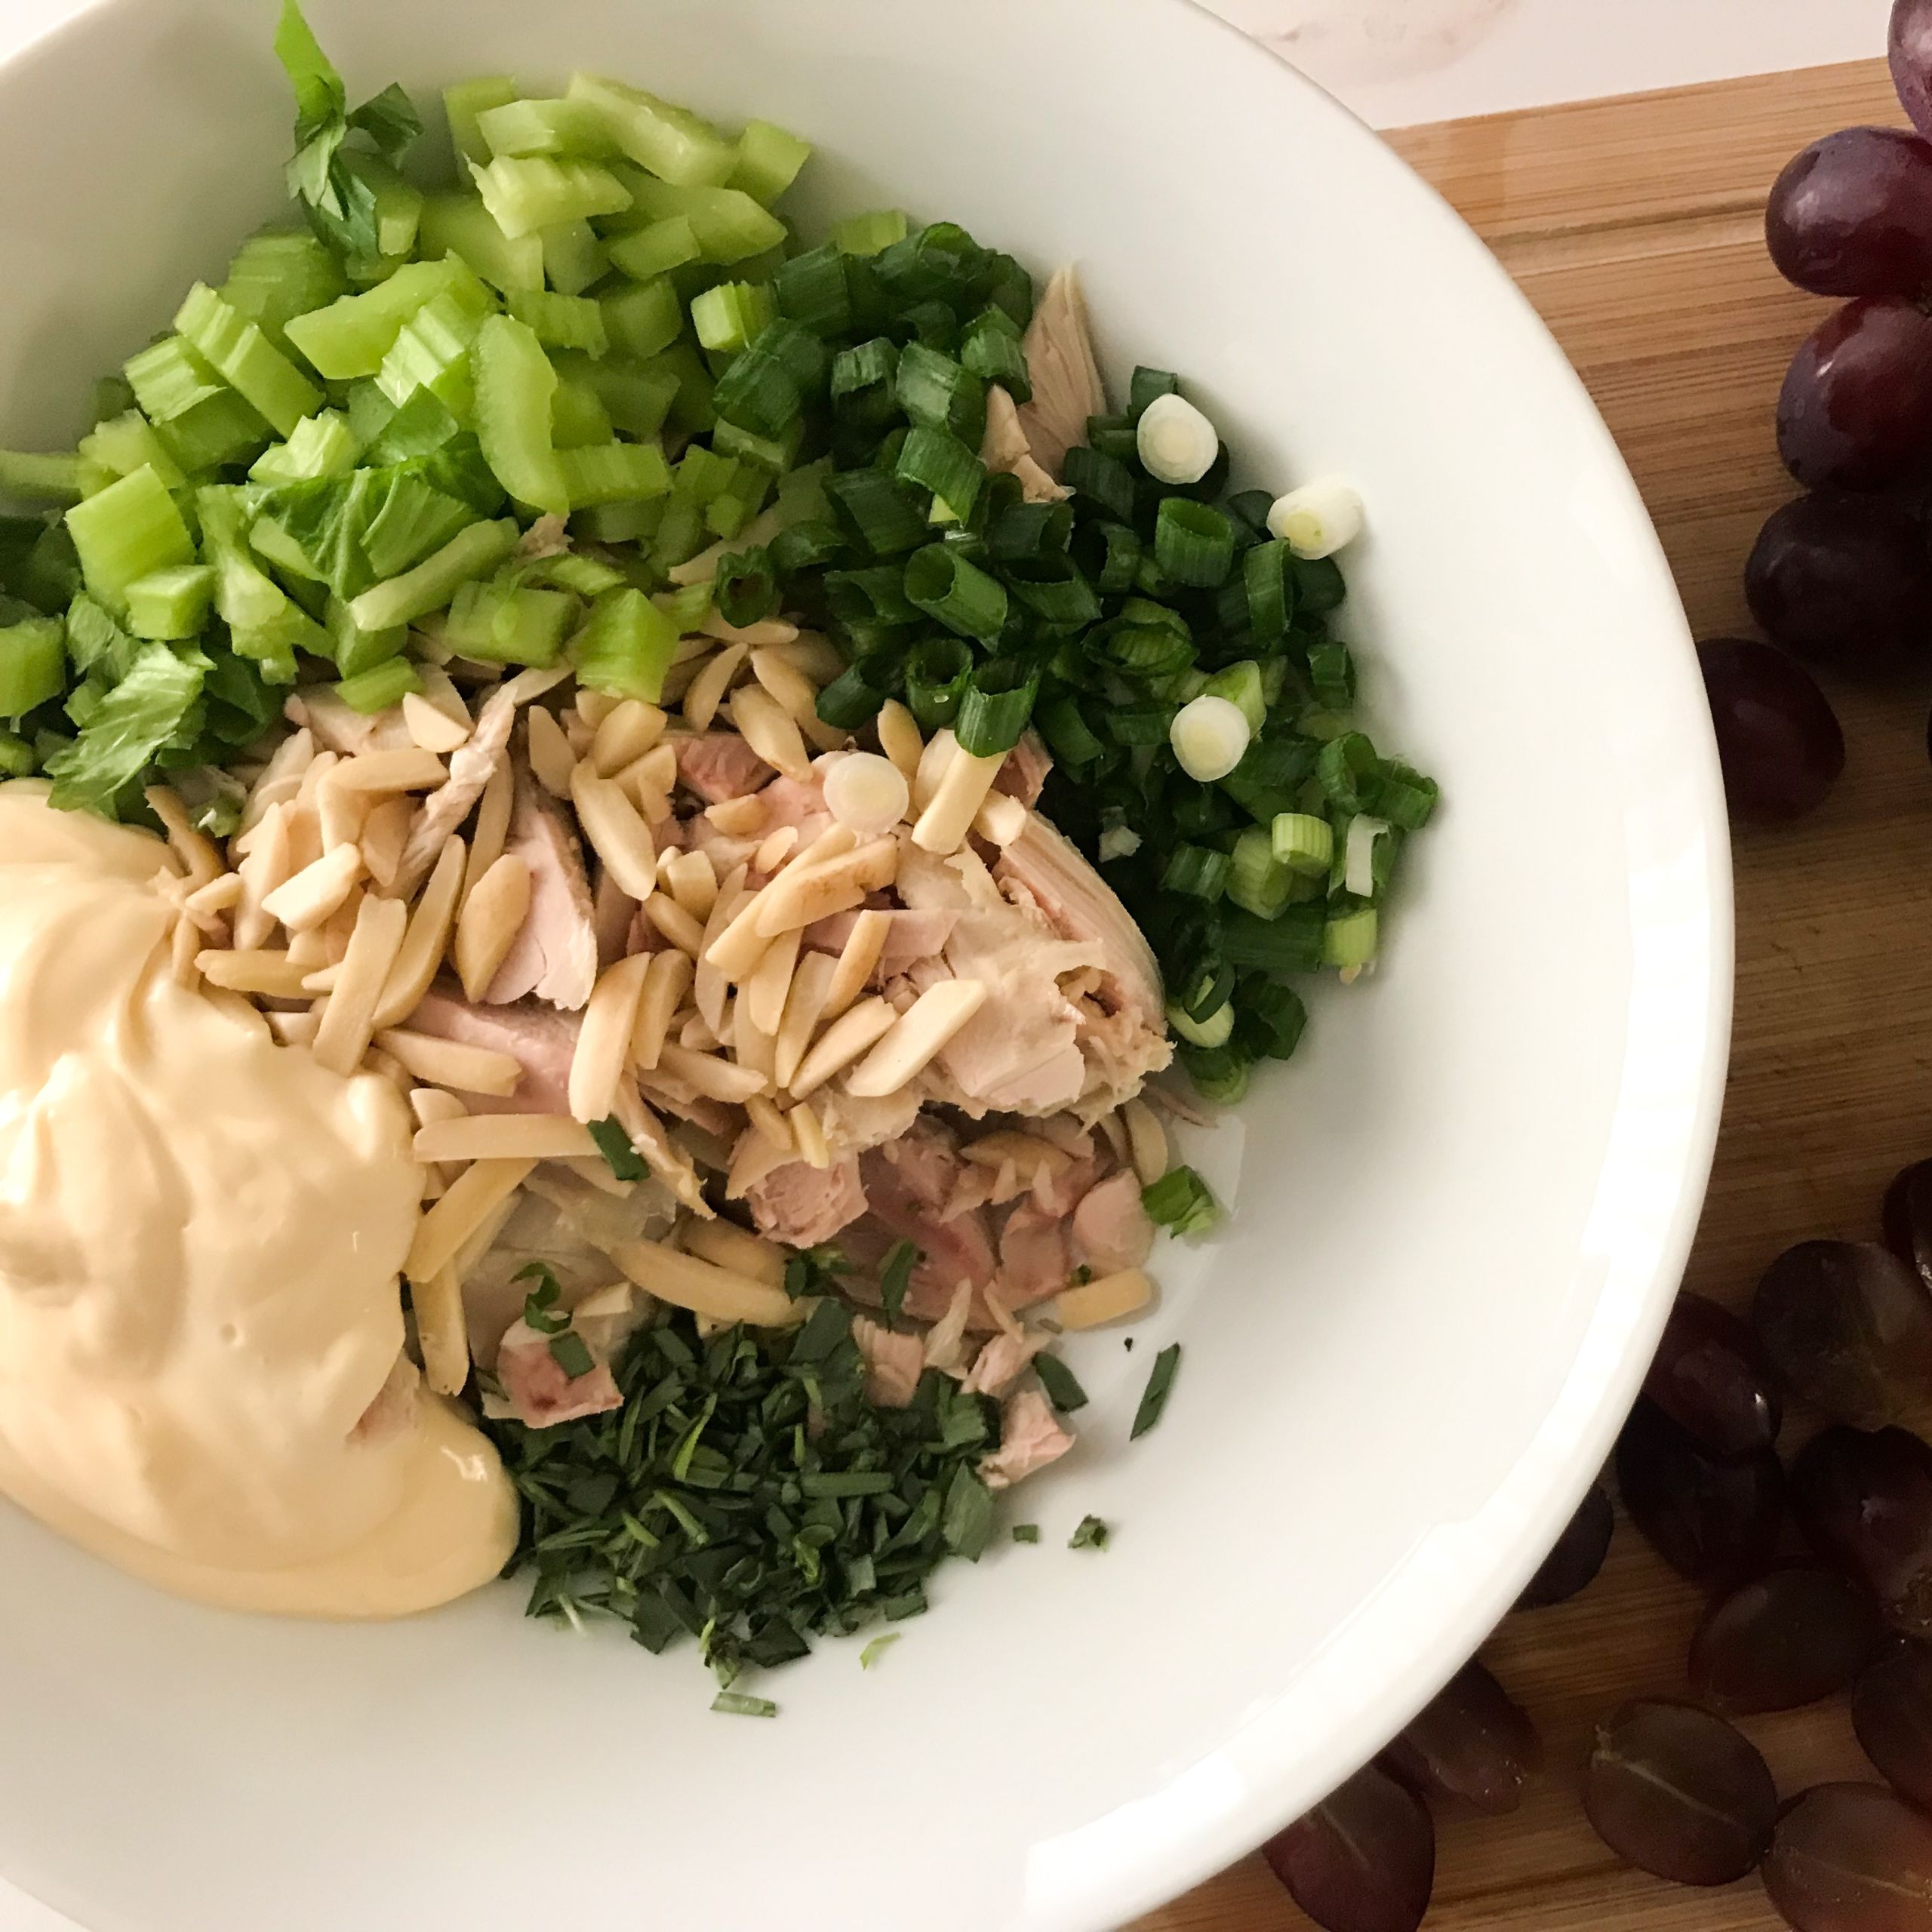 Chicken Salad With Almonds And Grapes | My Curated Tastes